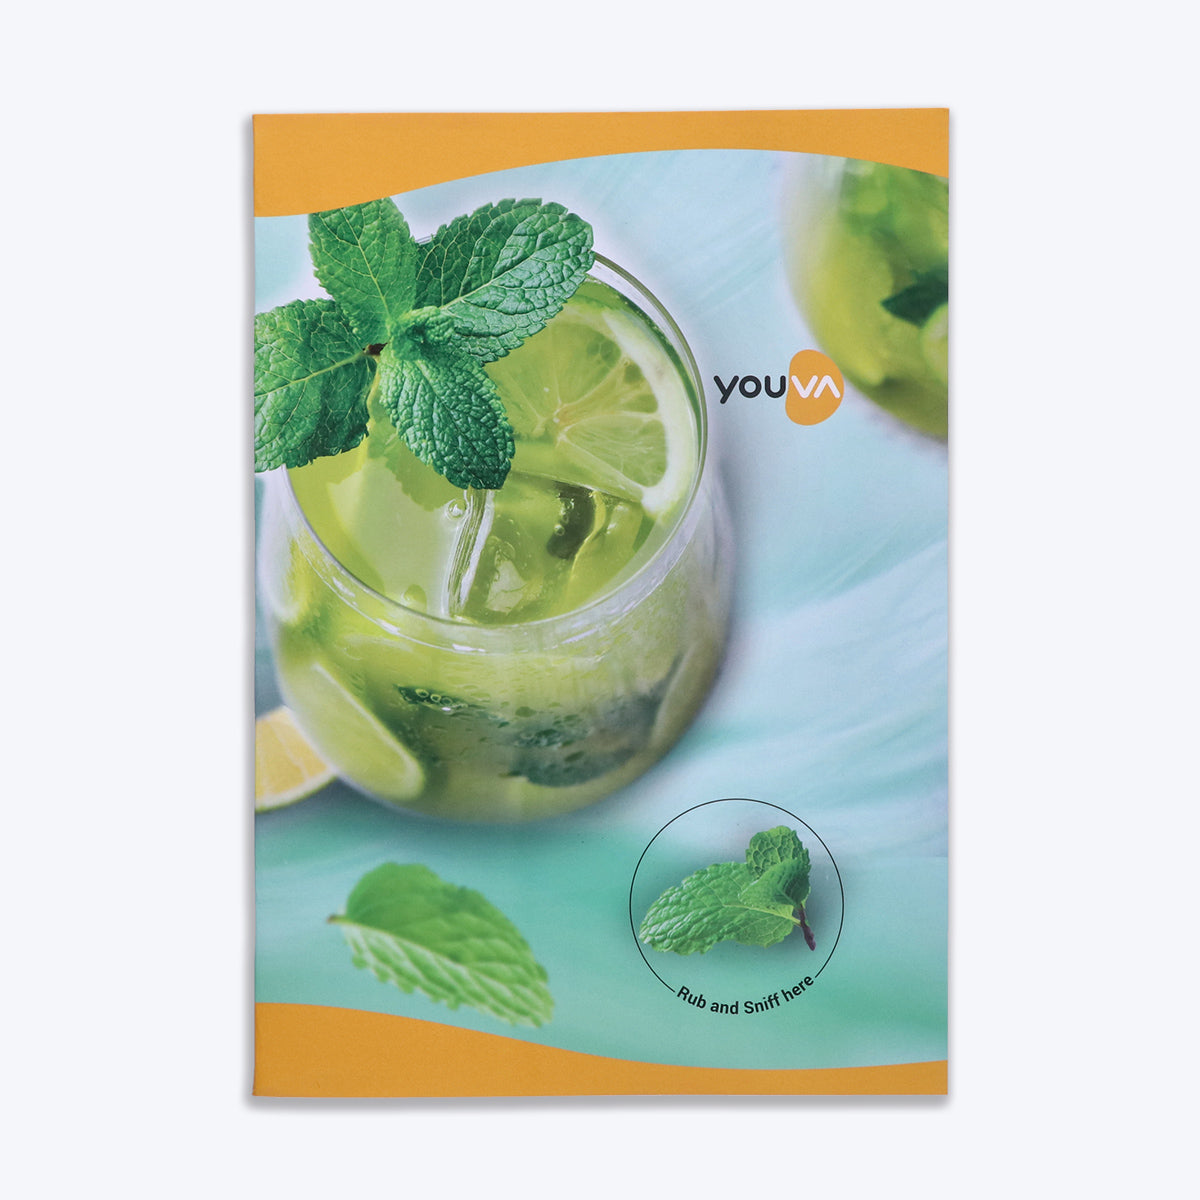 Navneet Youva | Fragrance| Soft bound Long Book for students and executives |Fragrance on the book cover| A4 size - 21 x 29.7 cm | Single Line | 172 Pages | Pack of 4